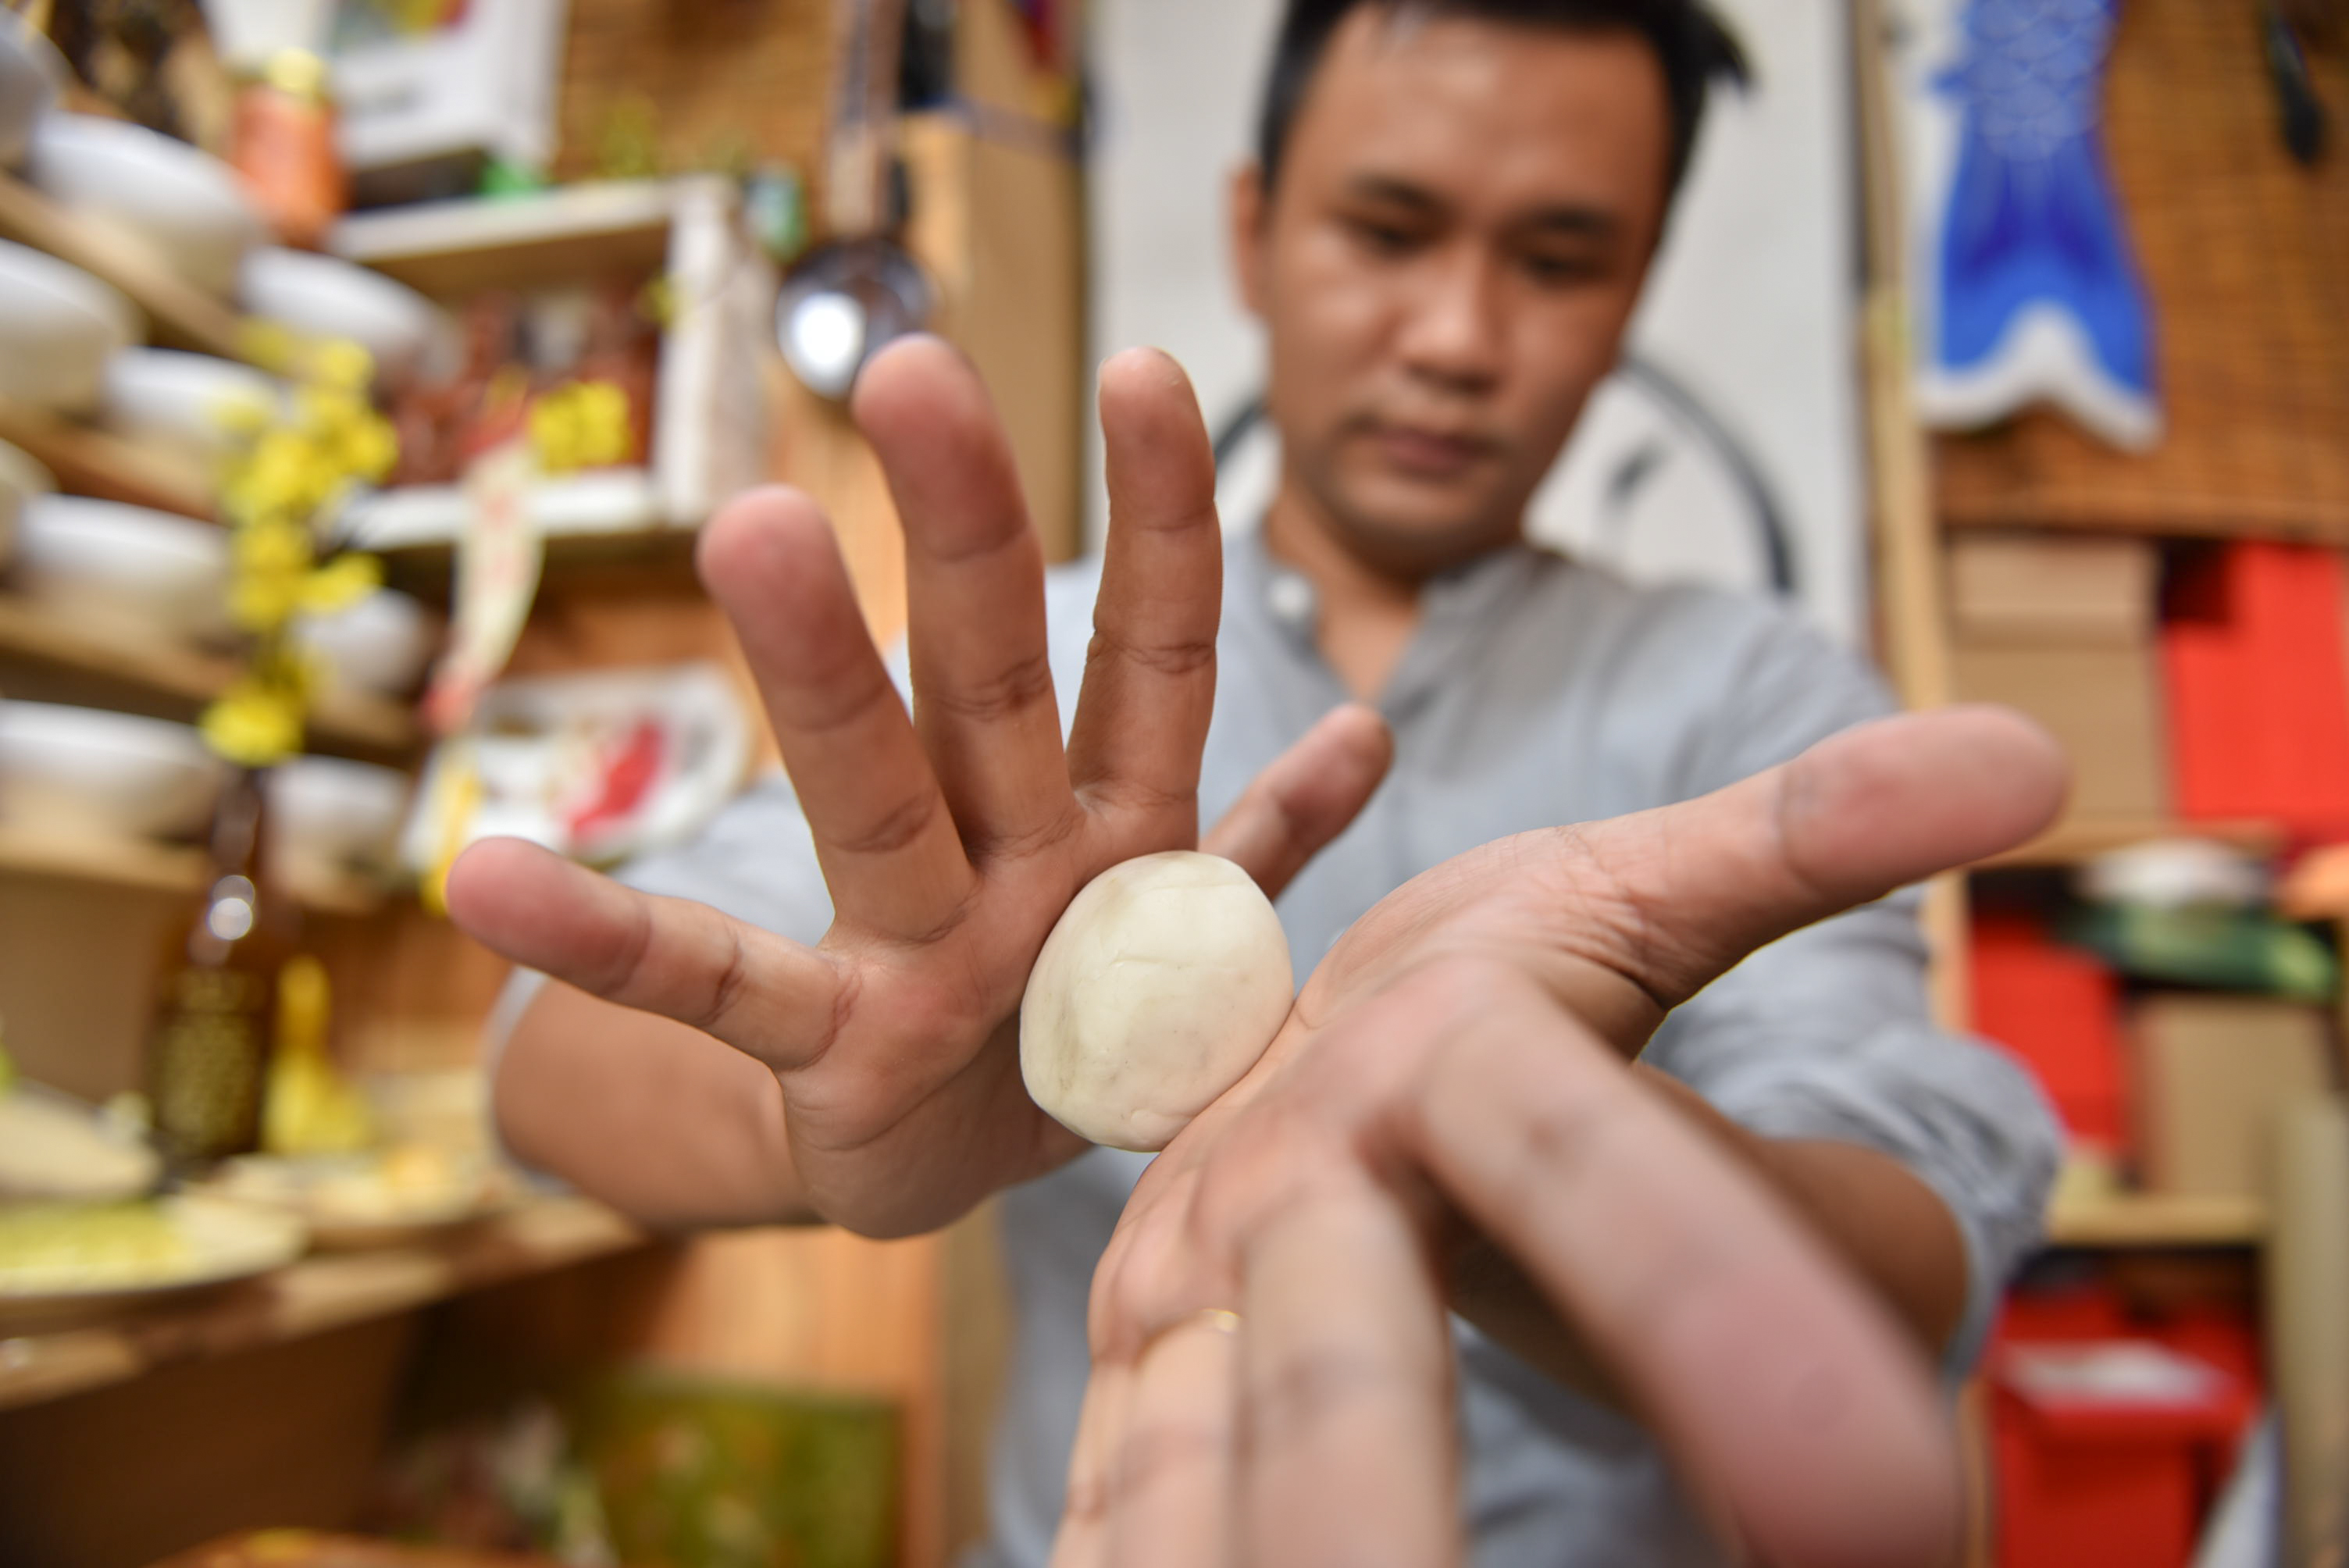 Nguyen Tan Dat working on clay with his hands. Photo: Ngoc Phuong / Tuoi Tre News